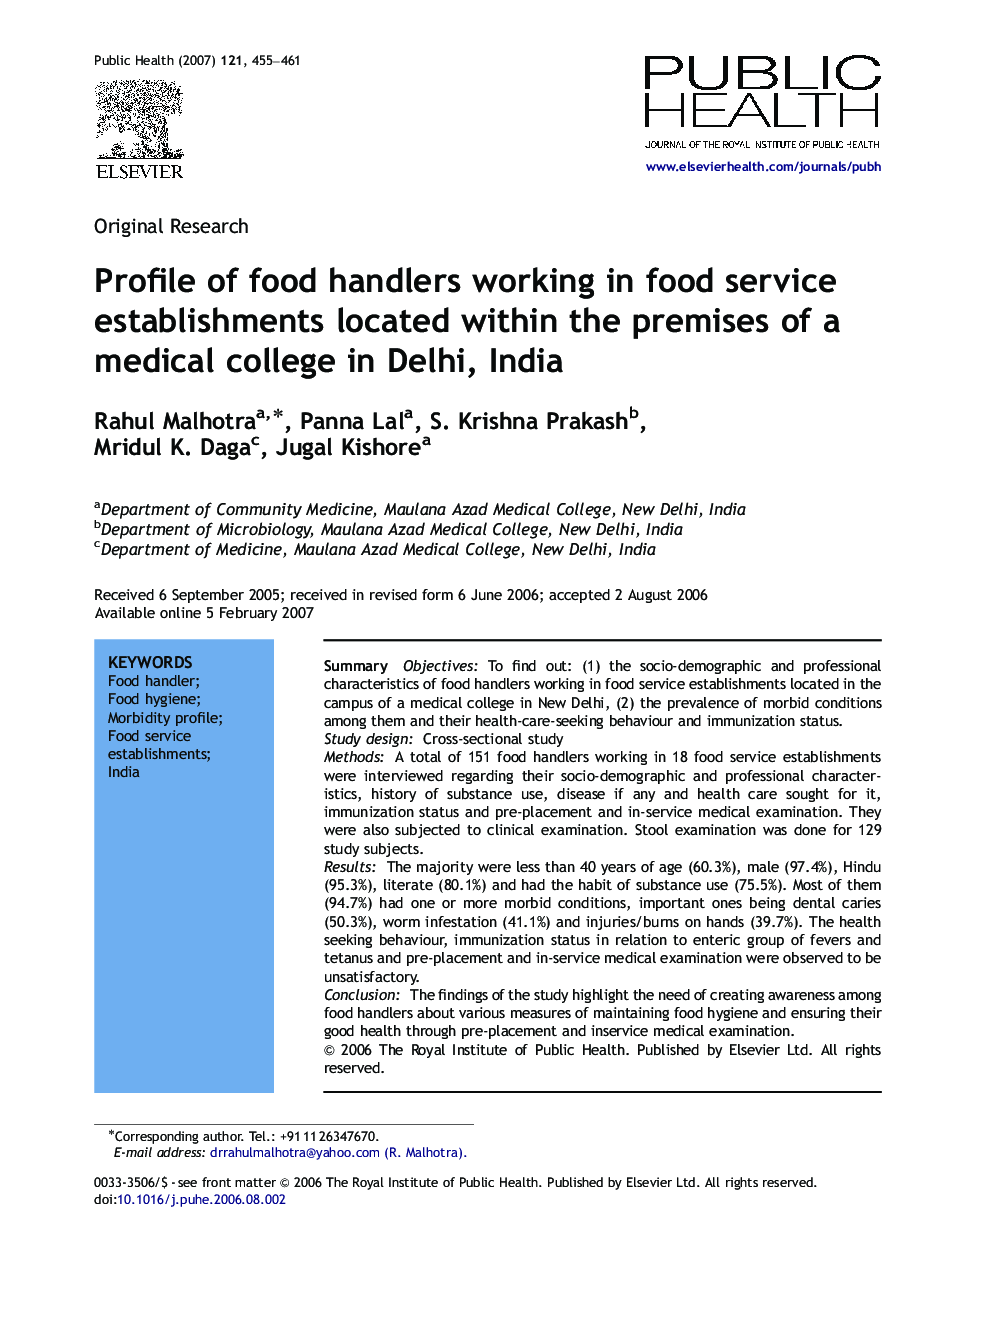 Profile of food handlers working in food service establishments located within the premises of a medical college in Delhi, India